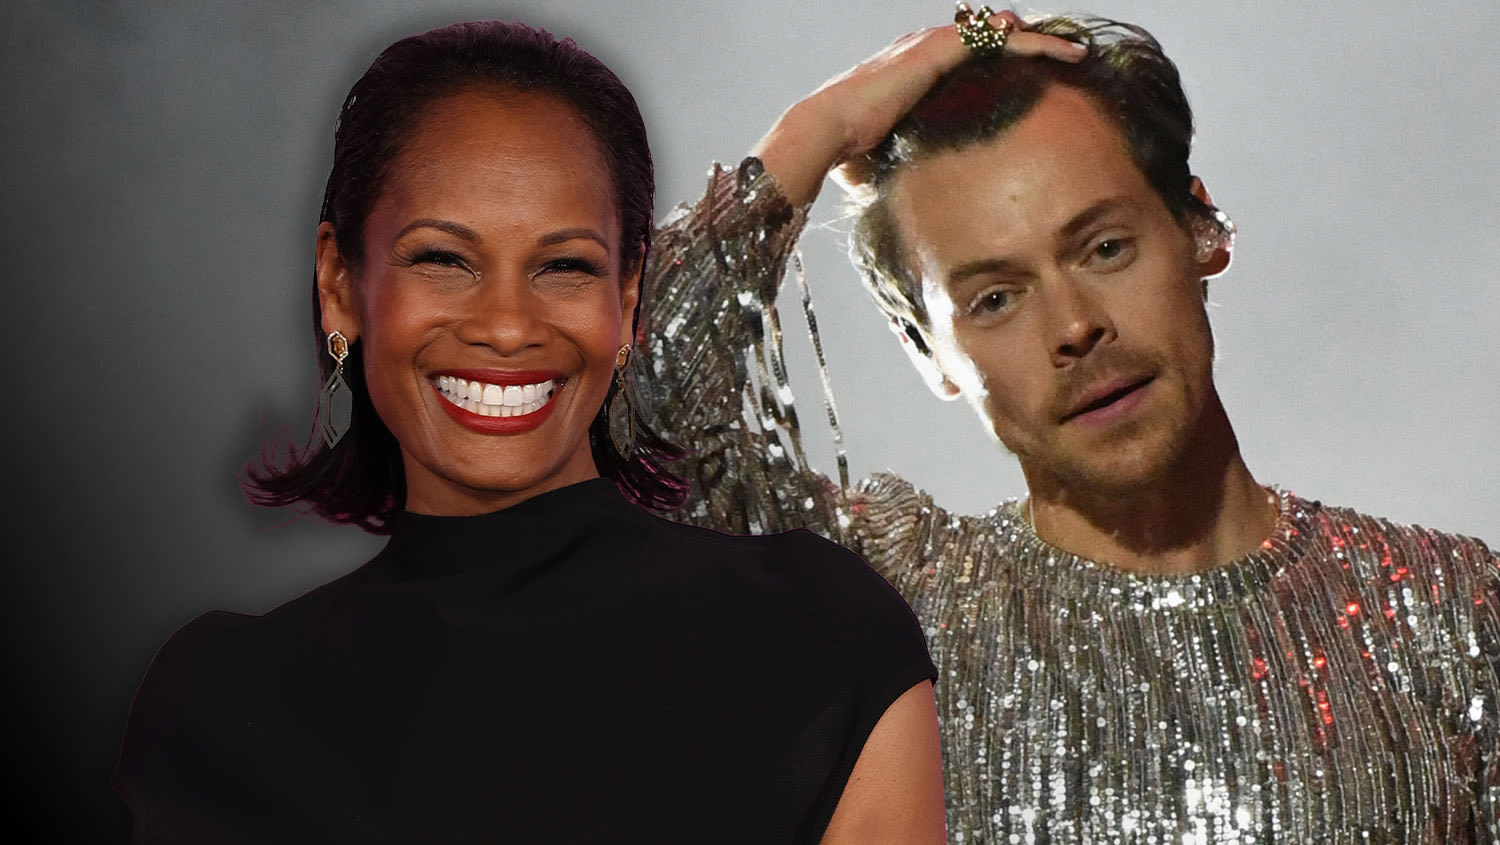 ‘The Idea Of You’ Author On Why She Regrets Saying Harry Styles Inspired Lead Character: “It’s Being Used As Clickbait...